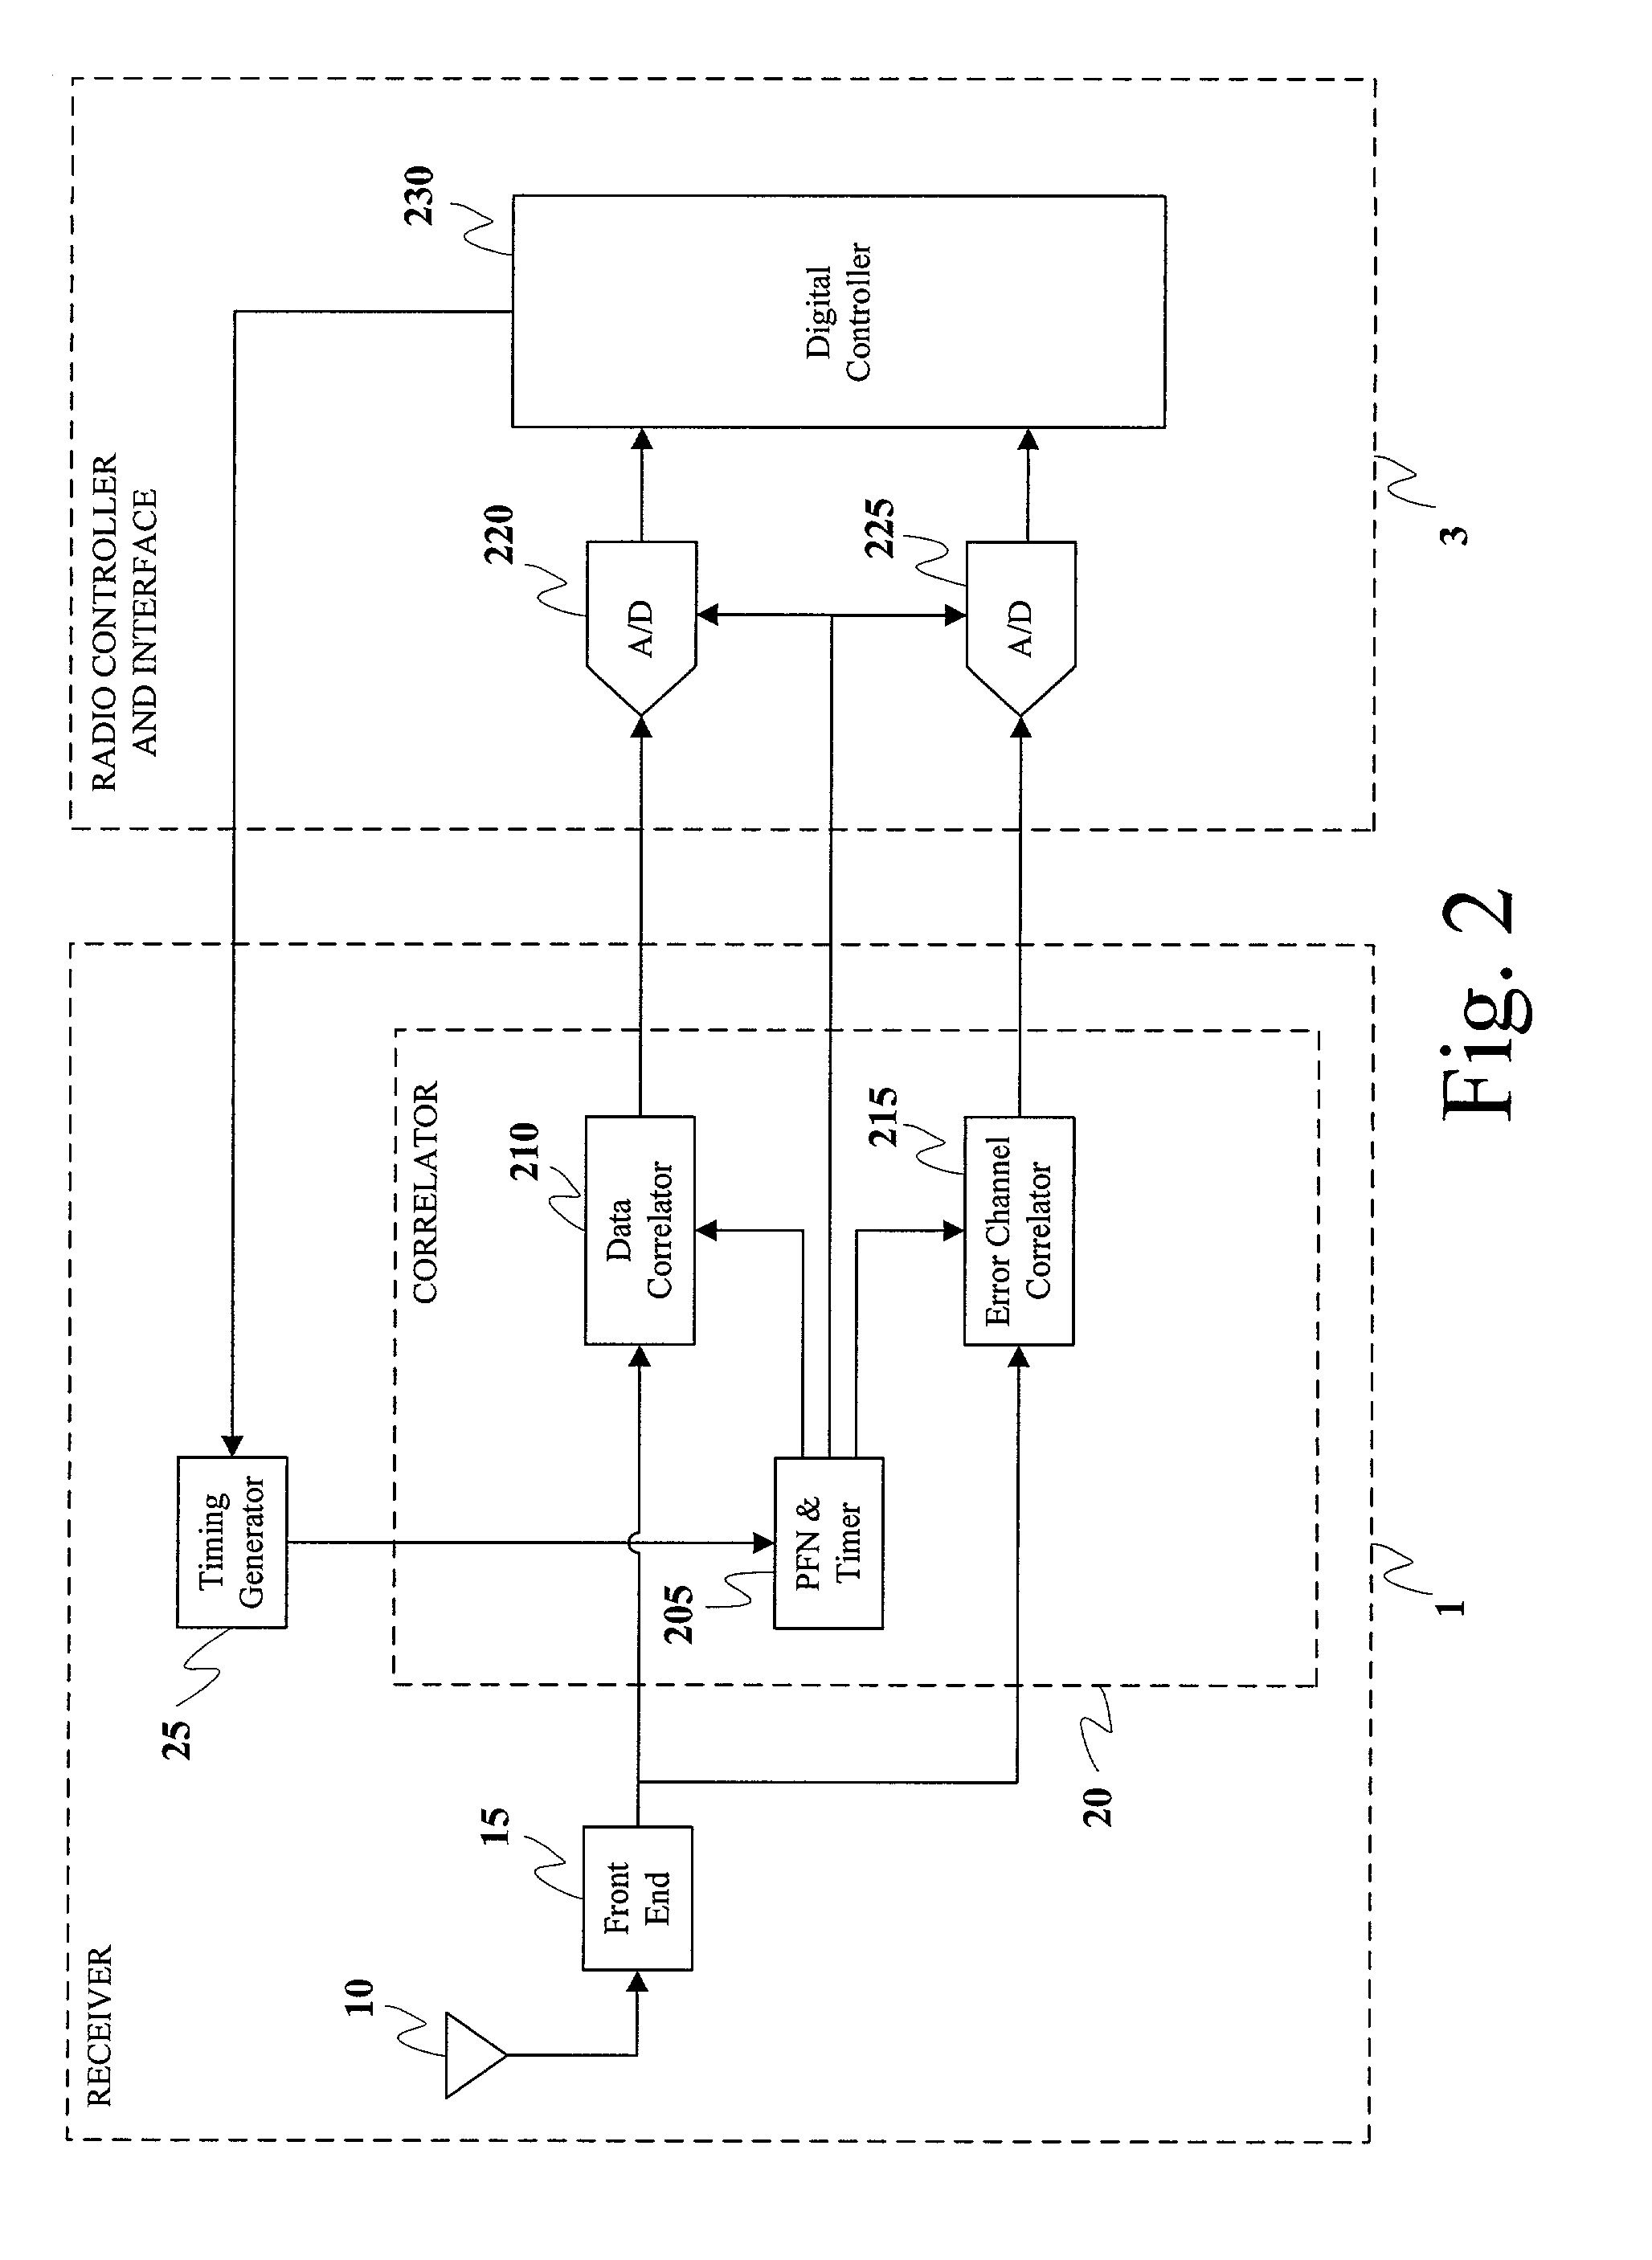 Mode controller for signal acquisition and tracking in an ultra wideband communication system